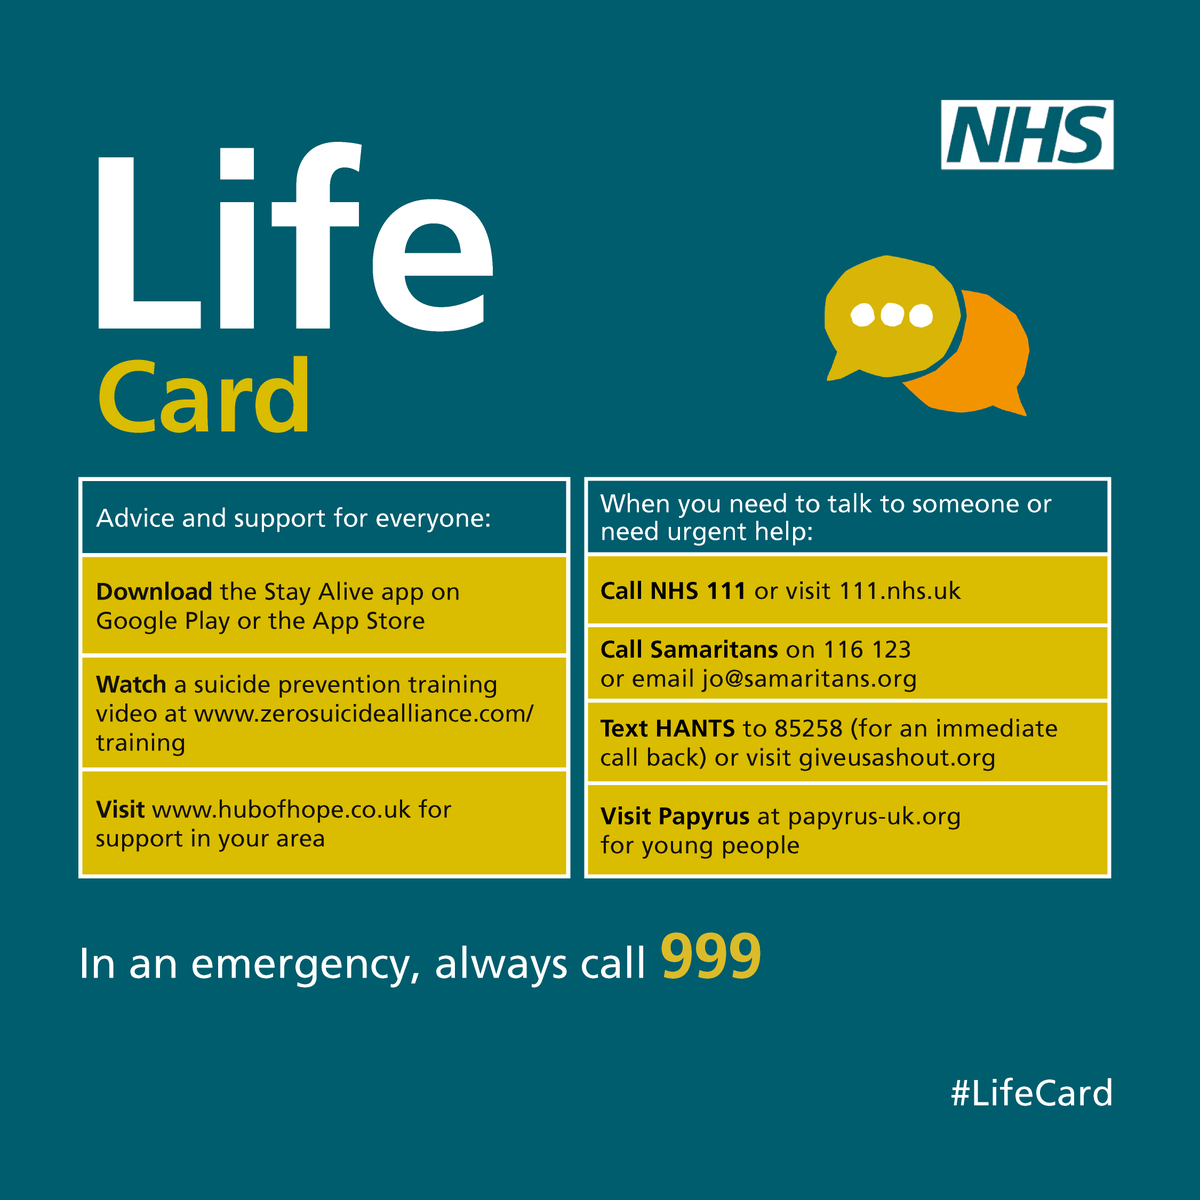 Today is #WorldSuicidePreventionDay, if you or a loved one have suicidal thoughts, do you know where to go for help? 💬 For mental health support, visit: southernhealth.nhs.uk/LifeCard #LifeCard #SuicidePrevention #WSPD23 @Southern_NHSFT